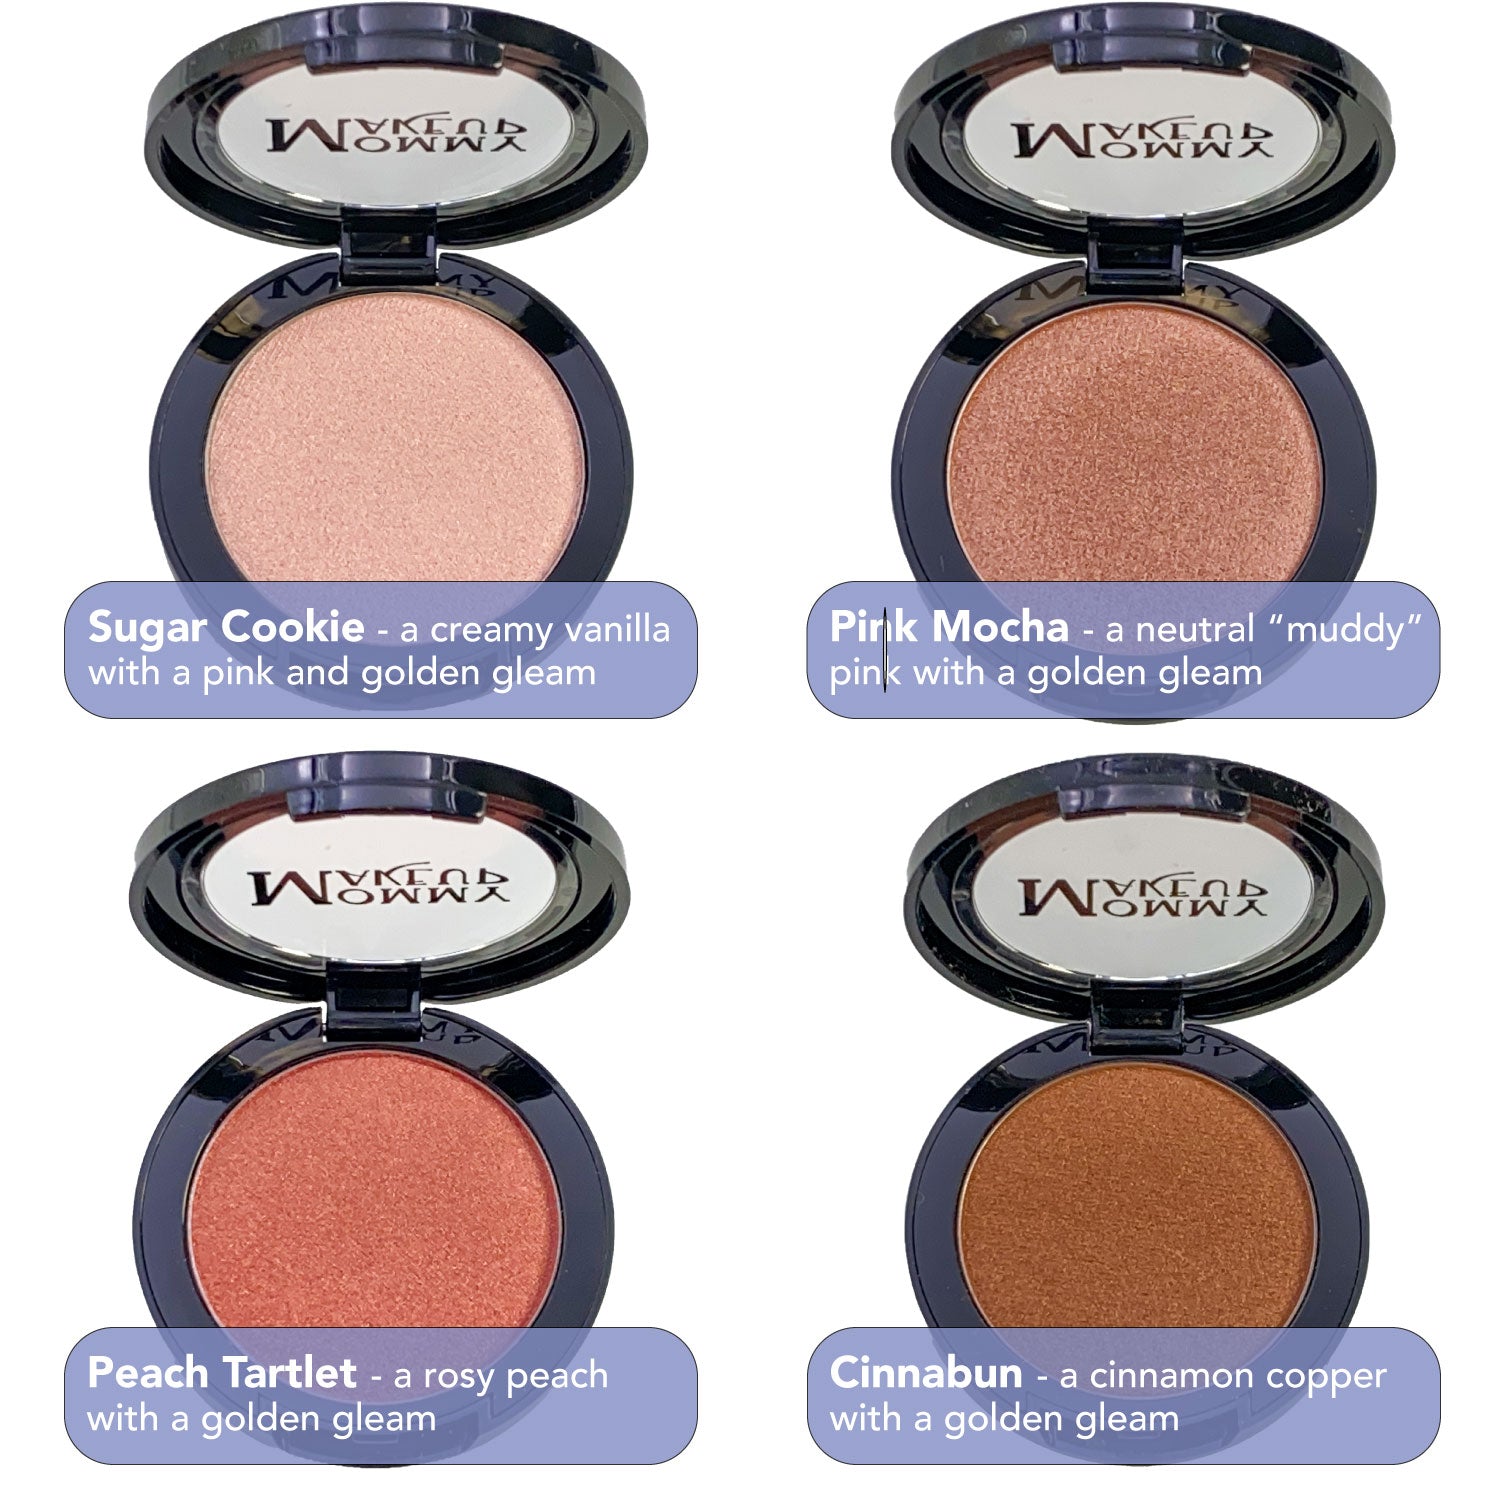 Powder Perfect Color Mineral Eyeshadow and Blush in 4 shades